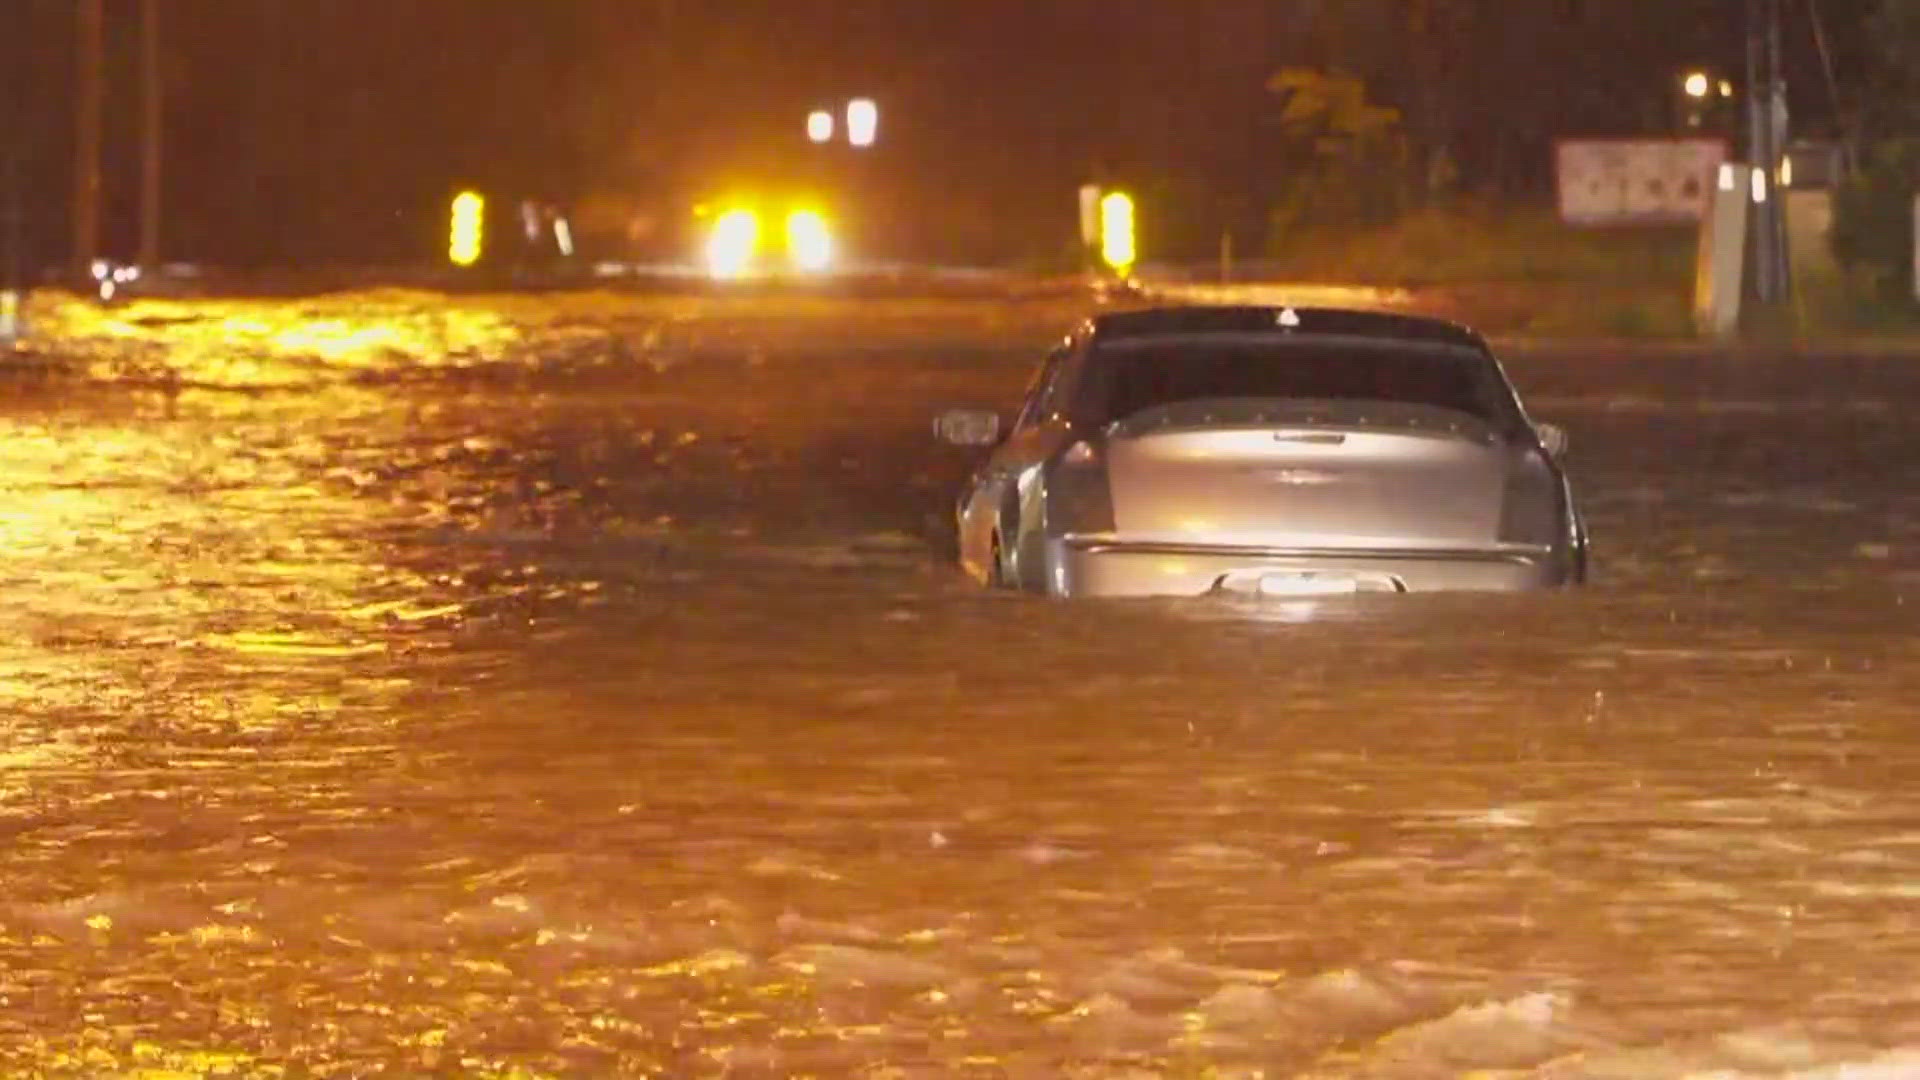 Flood waters submerged a vehicle in Everman overnight following heavy rain.